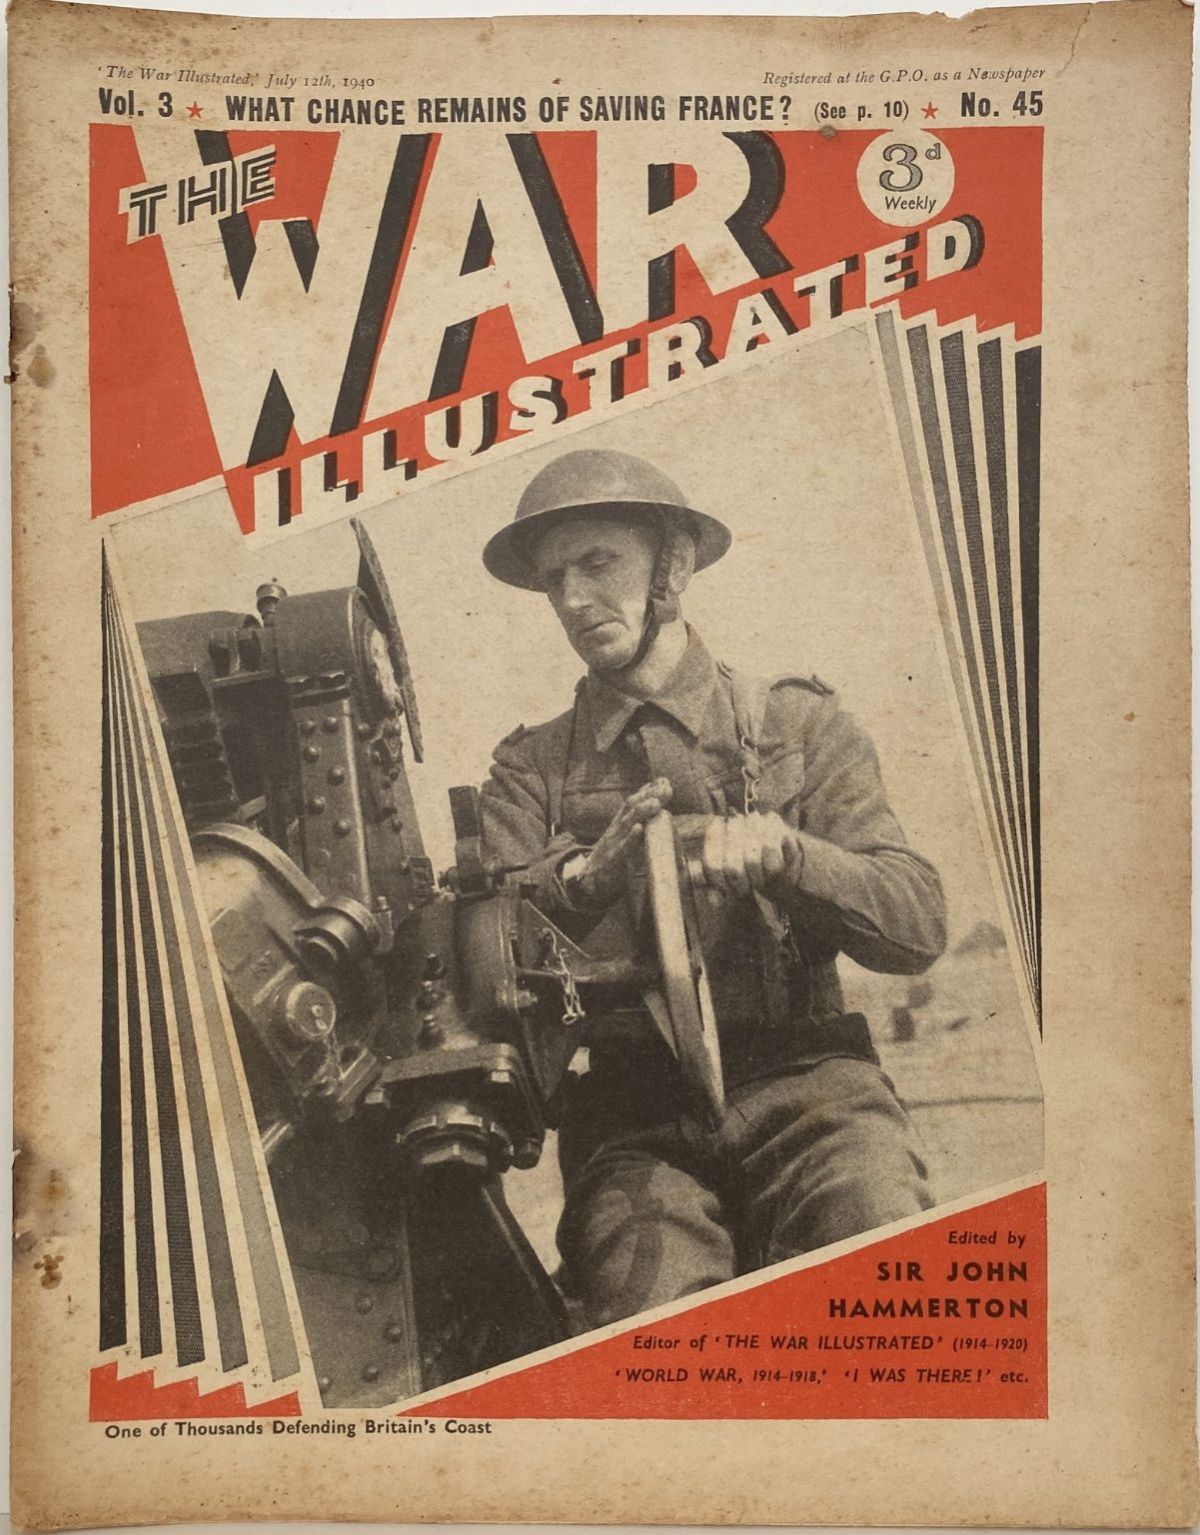 THE WAR ILLUSTRATED - Vol 3, No 45, 12th July 1940